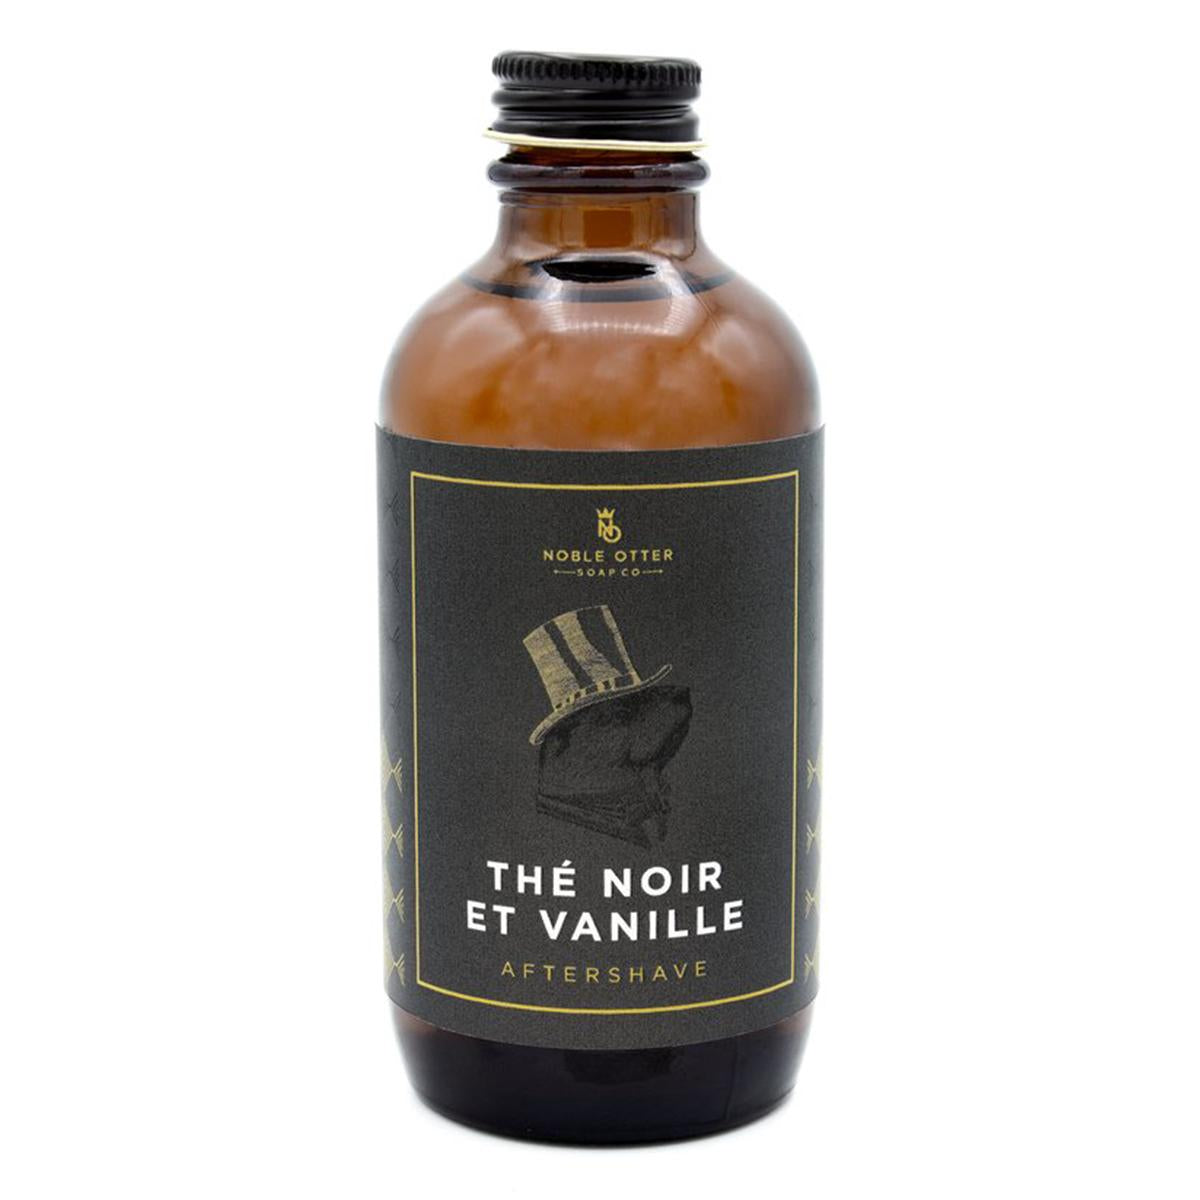 Primary image of The Noir et Vanille Aftershave